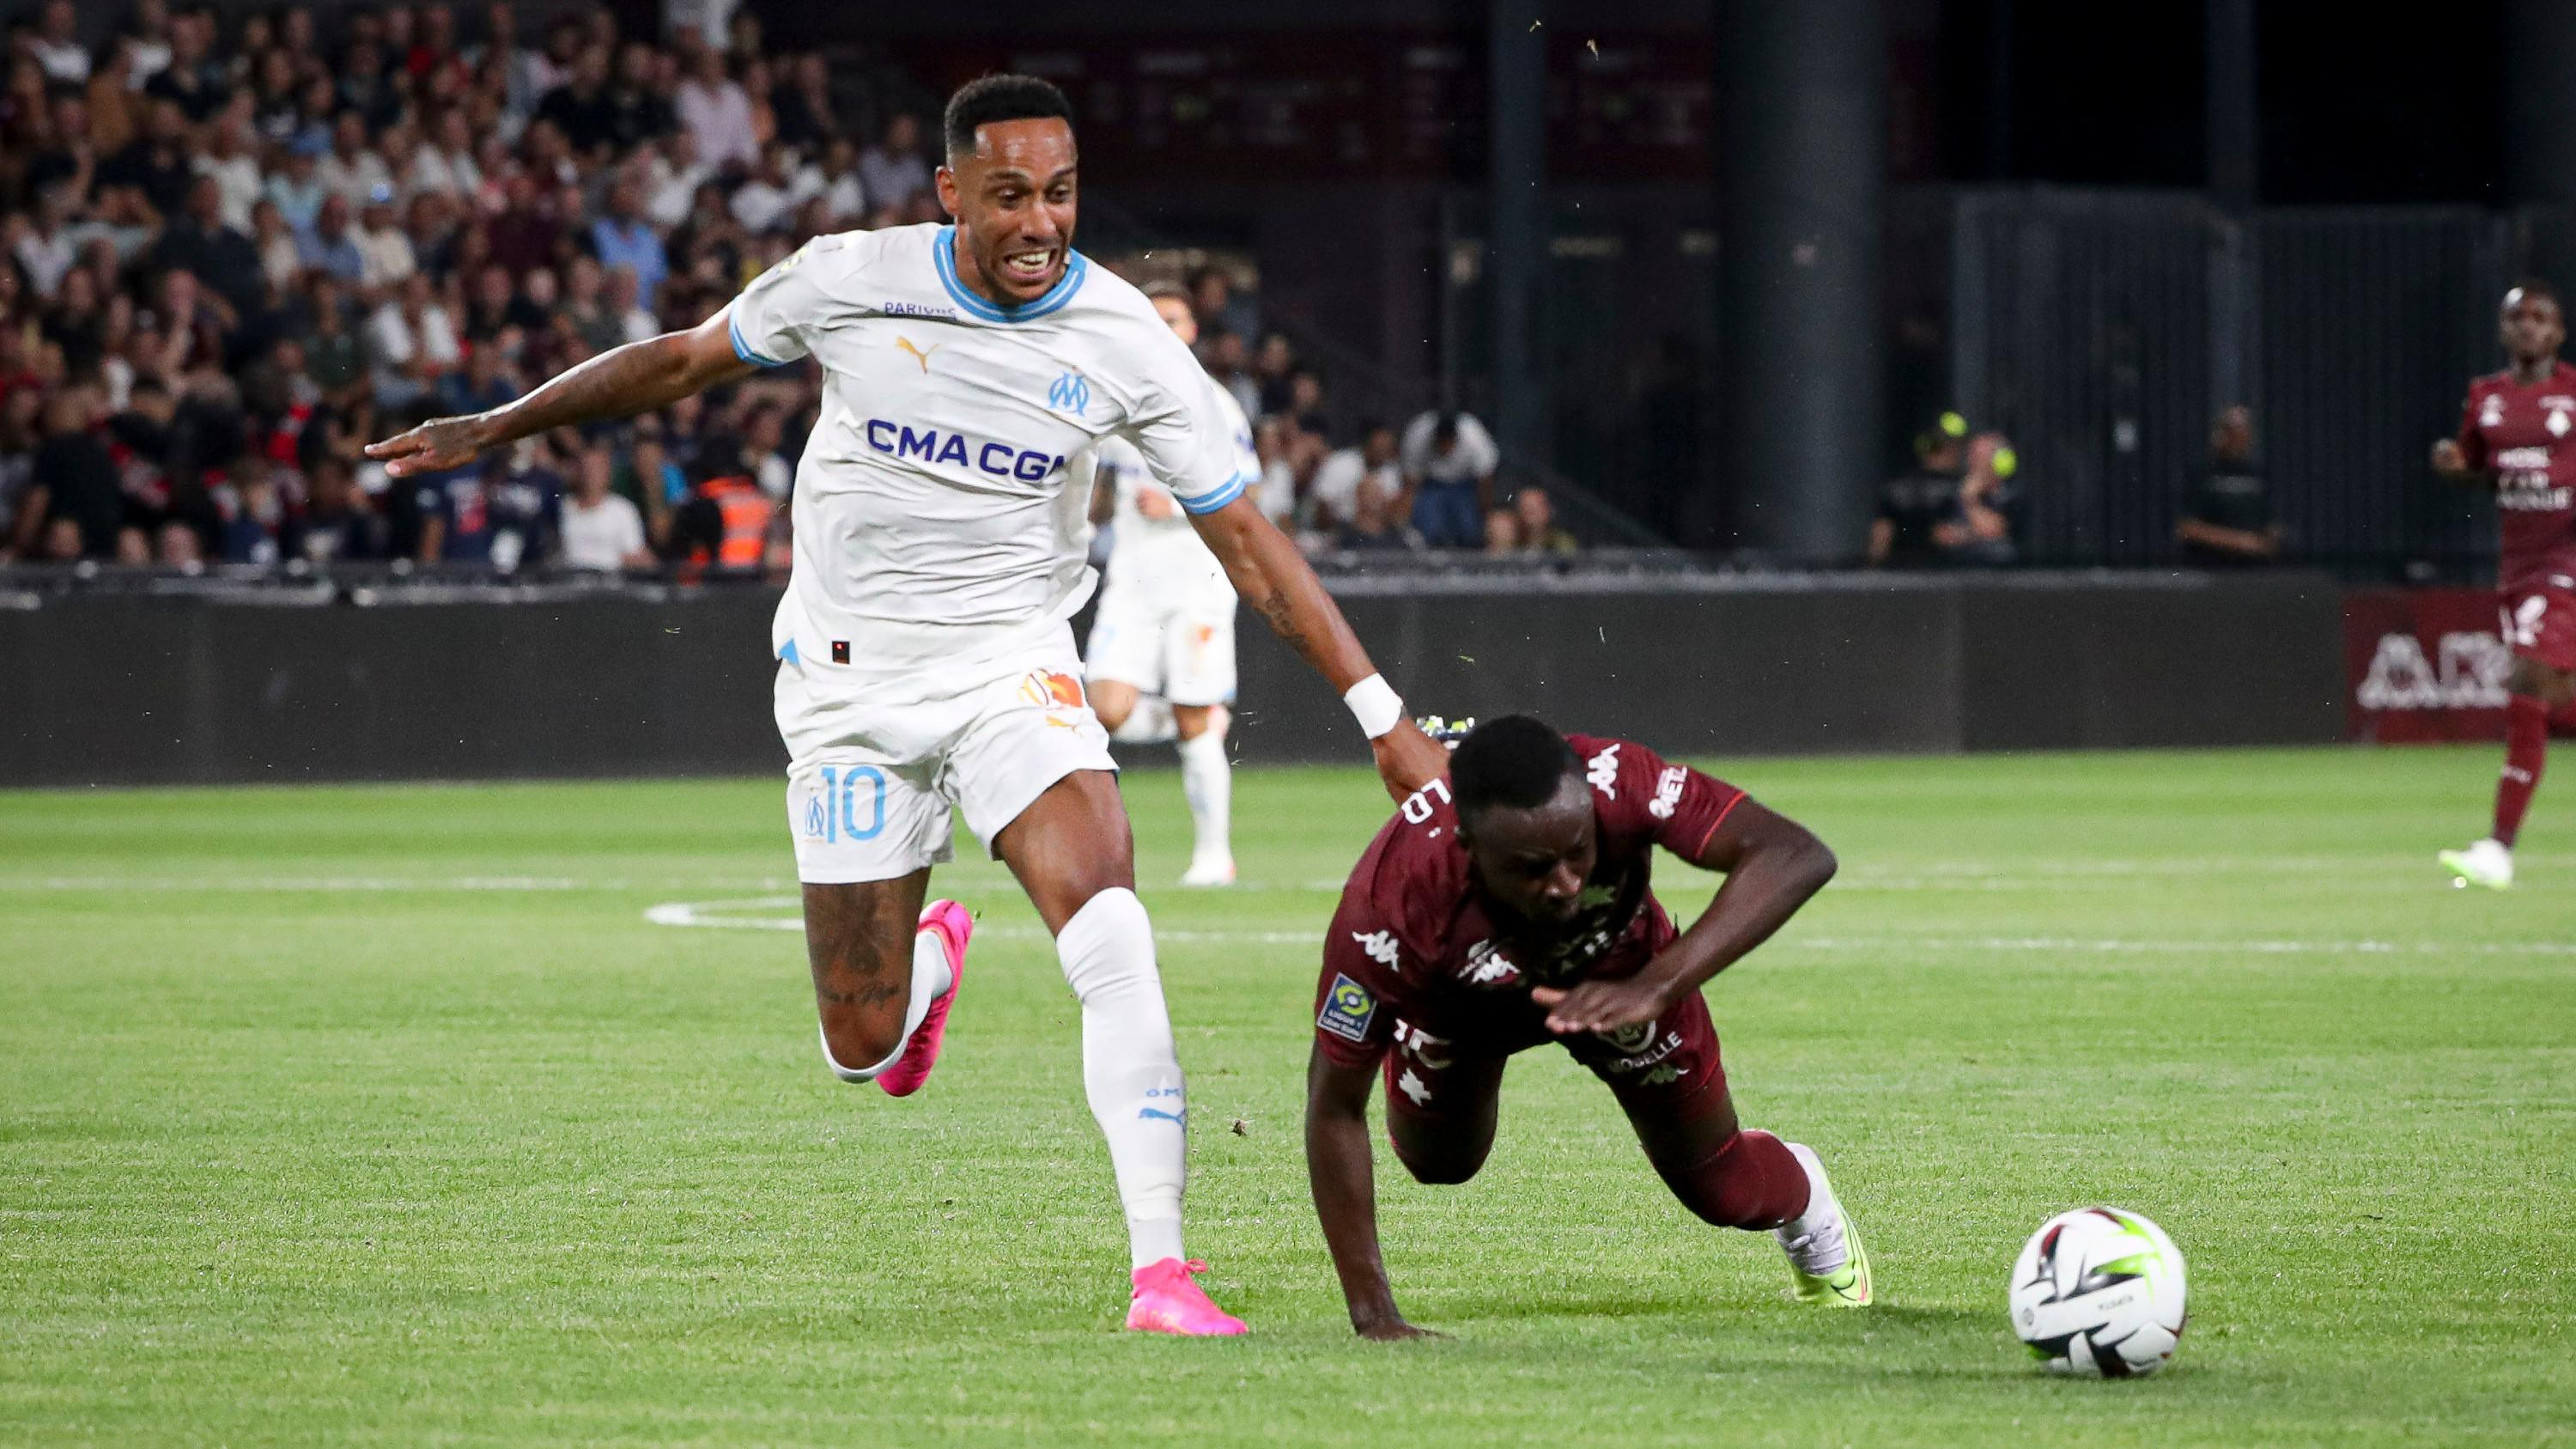 Ligue 1: at what time and on which channel to watch Marseille-Metz?